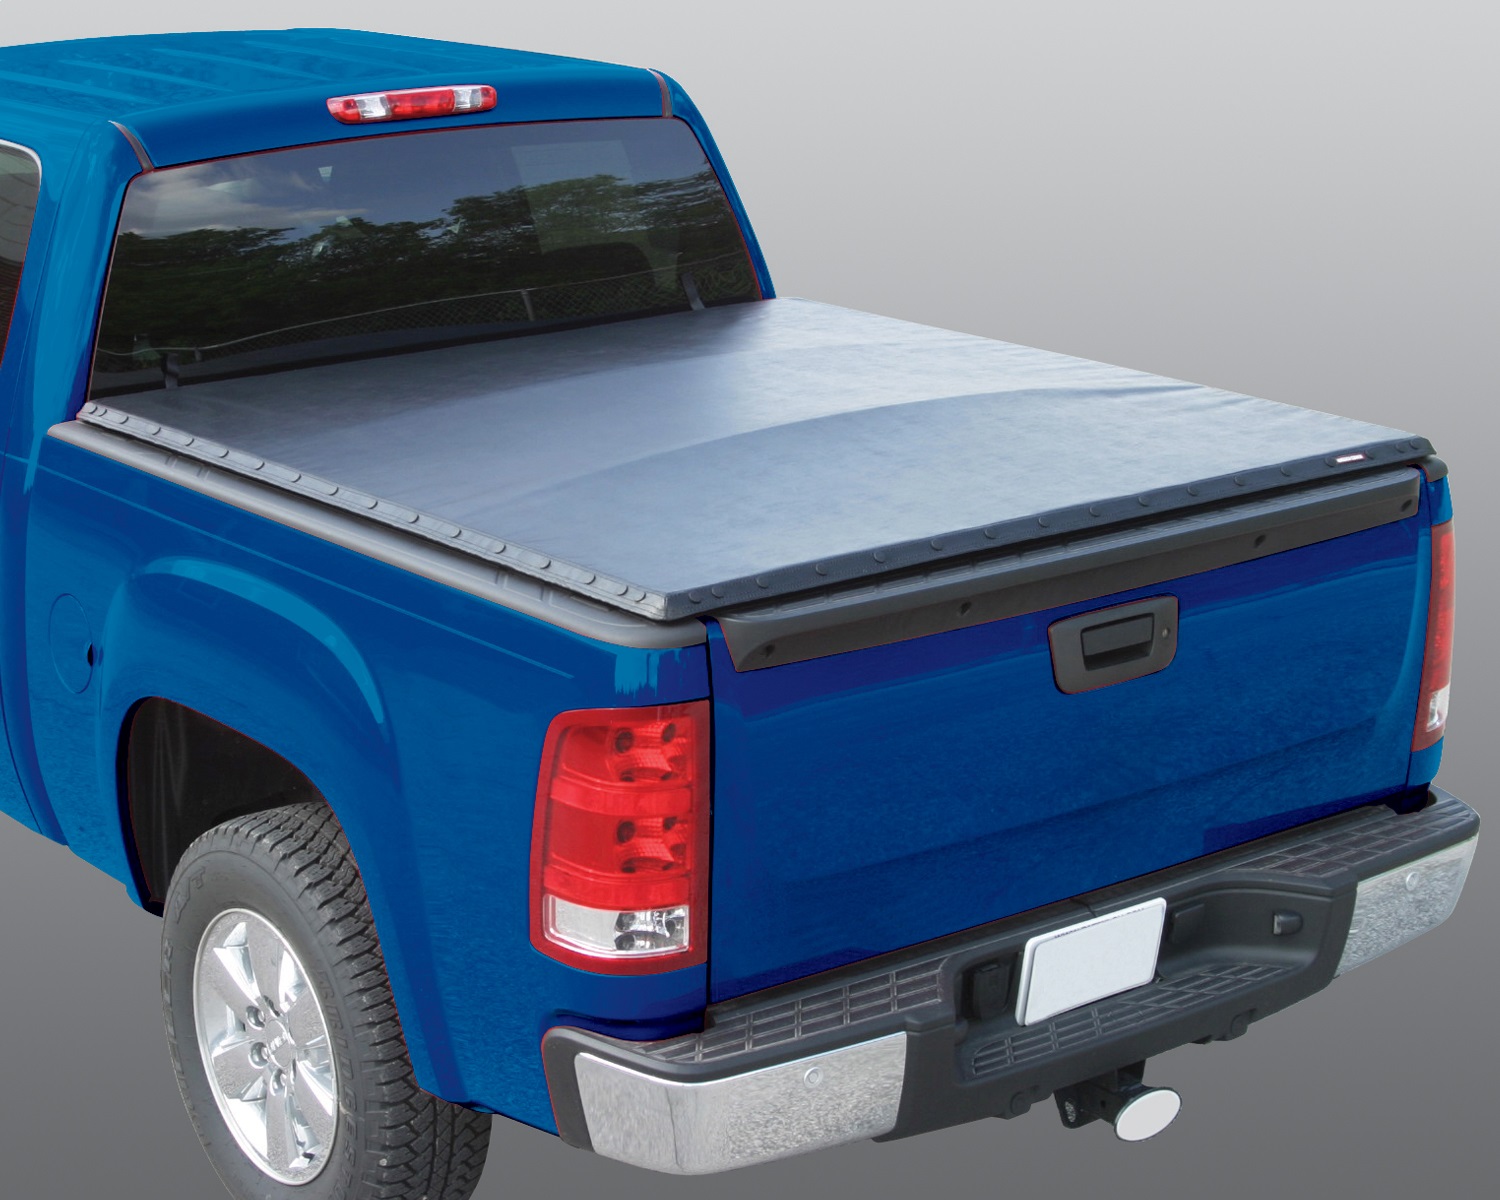 Rugged Liner Rugged Liner SN-D65945 Rugged Cover; Tonneau Cover Fits 94-01 Ram 1500 Ram 2500